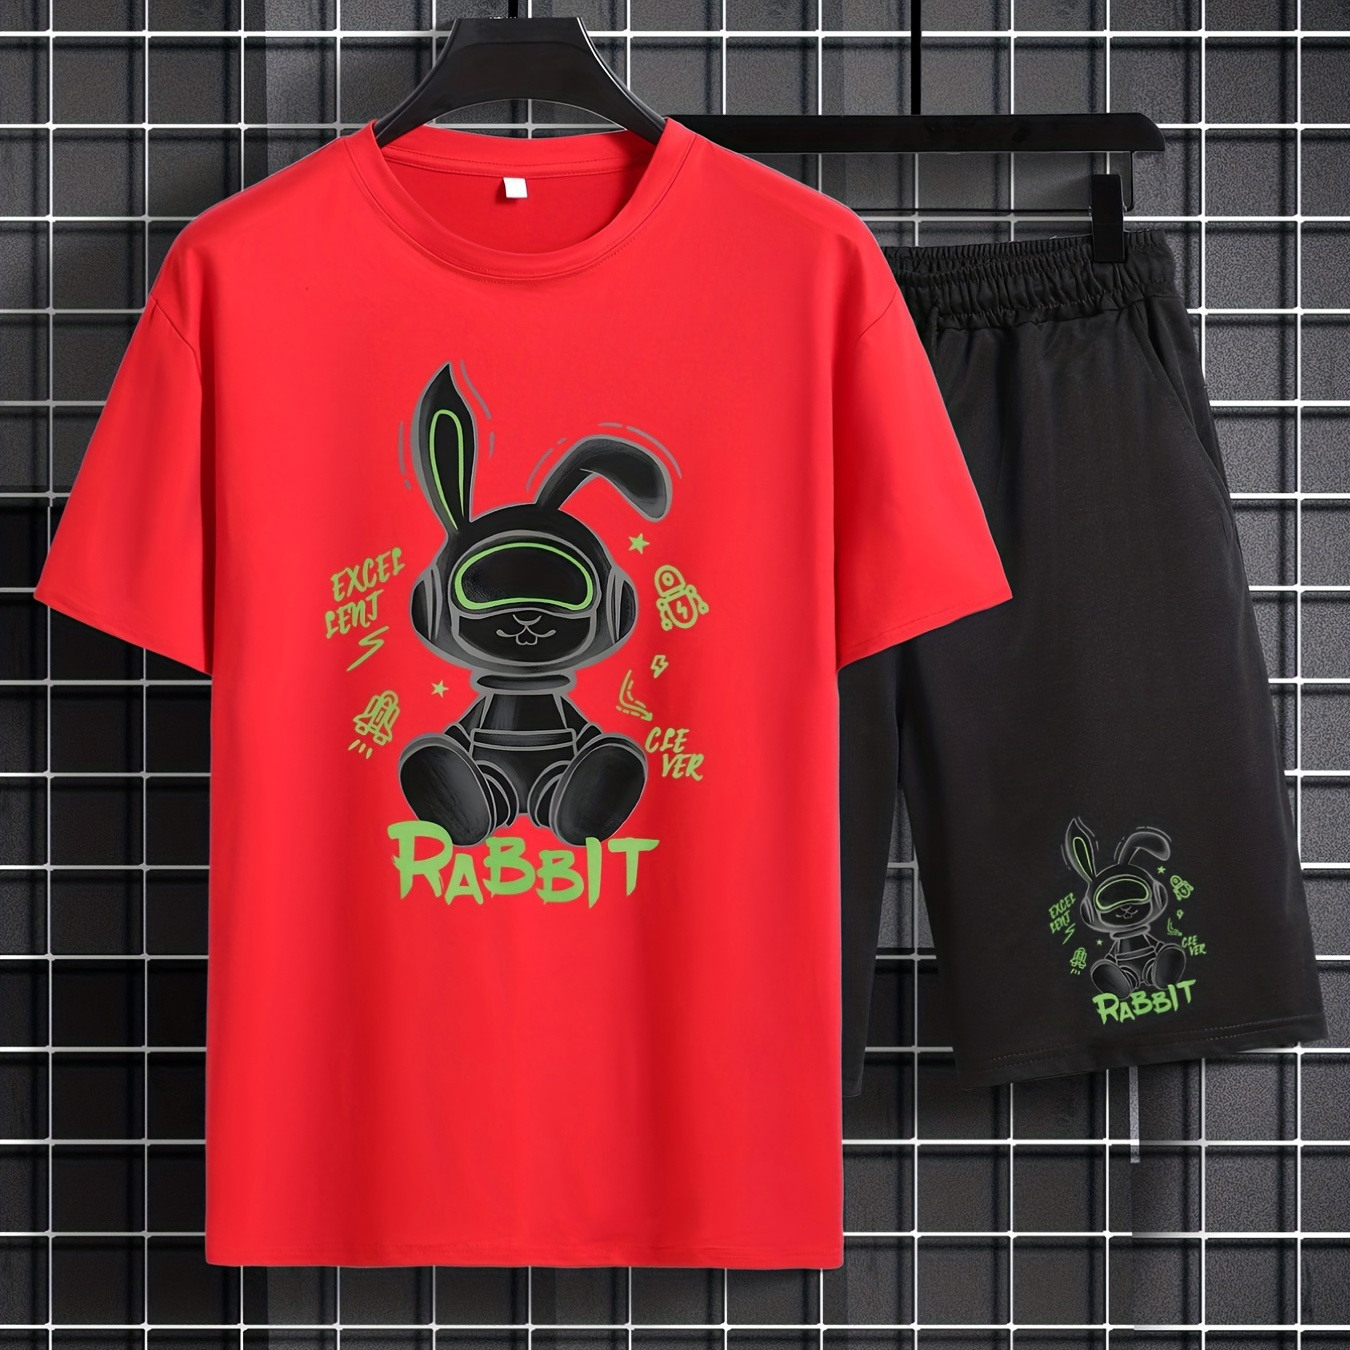 

Future Anime Rabbit Print, Men's 2pcs Outfits, Casual Crew Neck Short Sleeve T-shirt And Drawstring Shorts Set For Summer, Men's Clothing Loungewear Vacation Workout